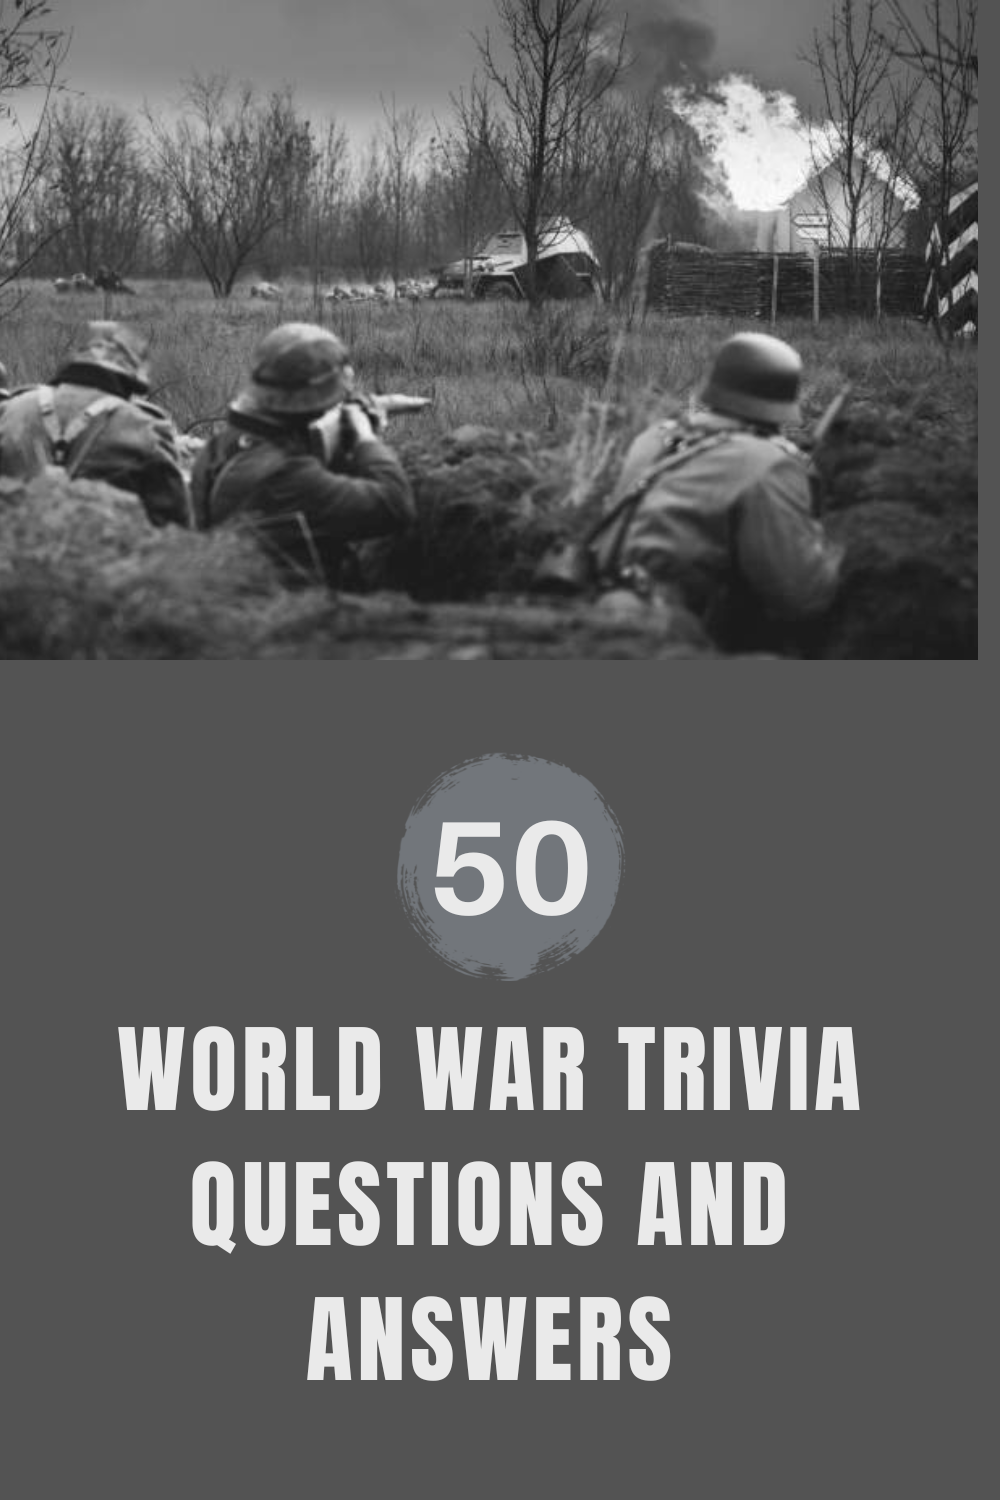 50 World War Trivia Questions and Answers